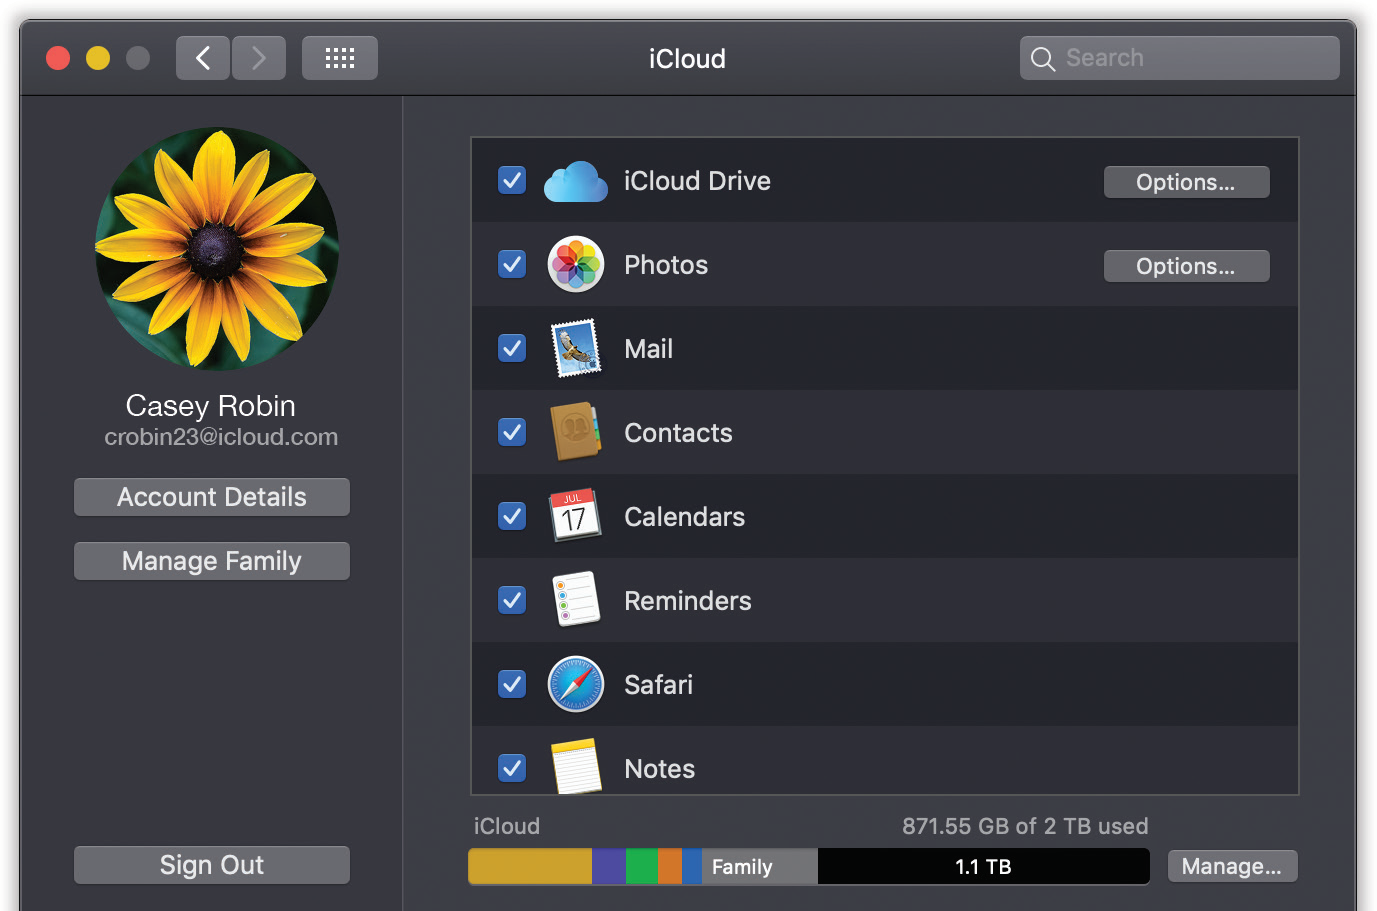 The headquarters of iCloud’s features. You’ll find a nearly identical panel on your iPhone, iPad, or iPod Touch (in Settings → iCloud).